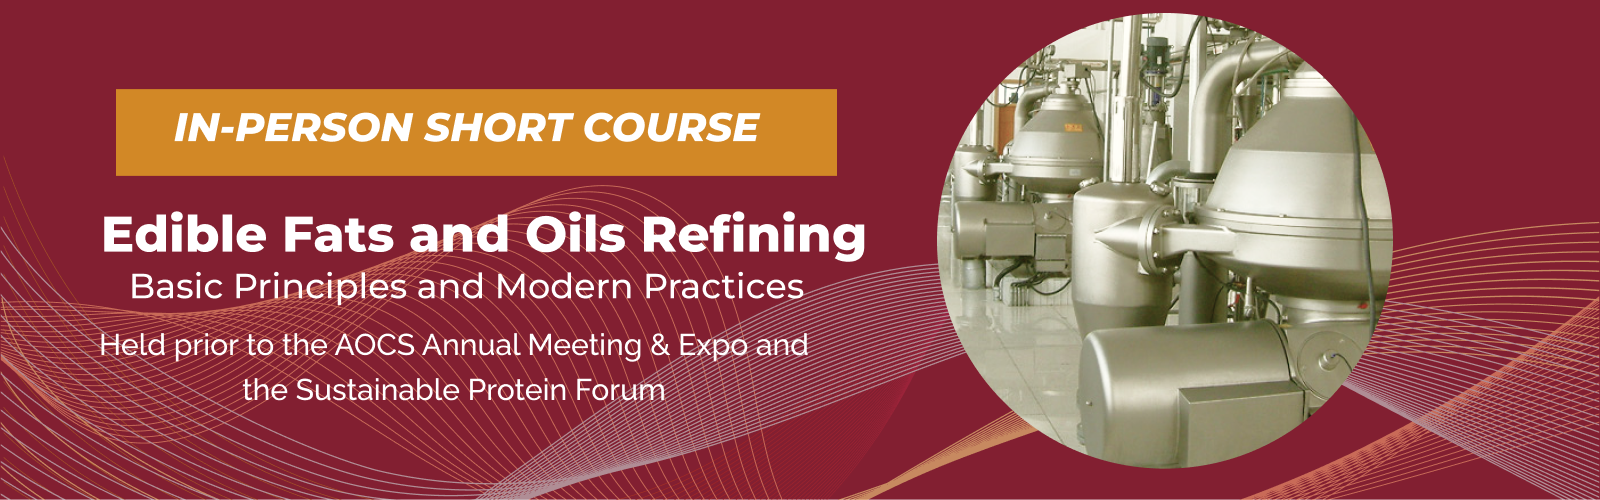 Edible Fats and Oils Refining: Basic Principles and Modern Practices 